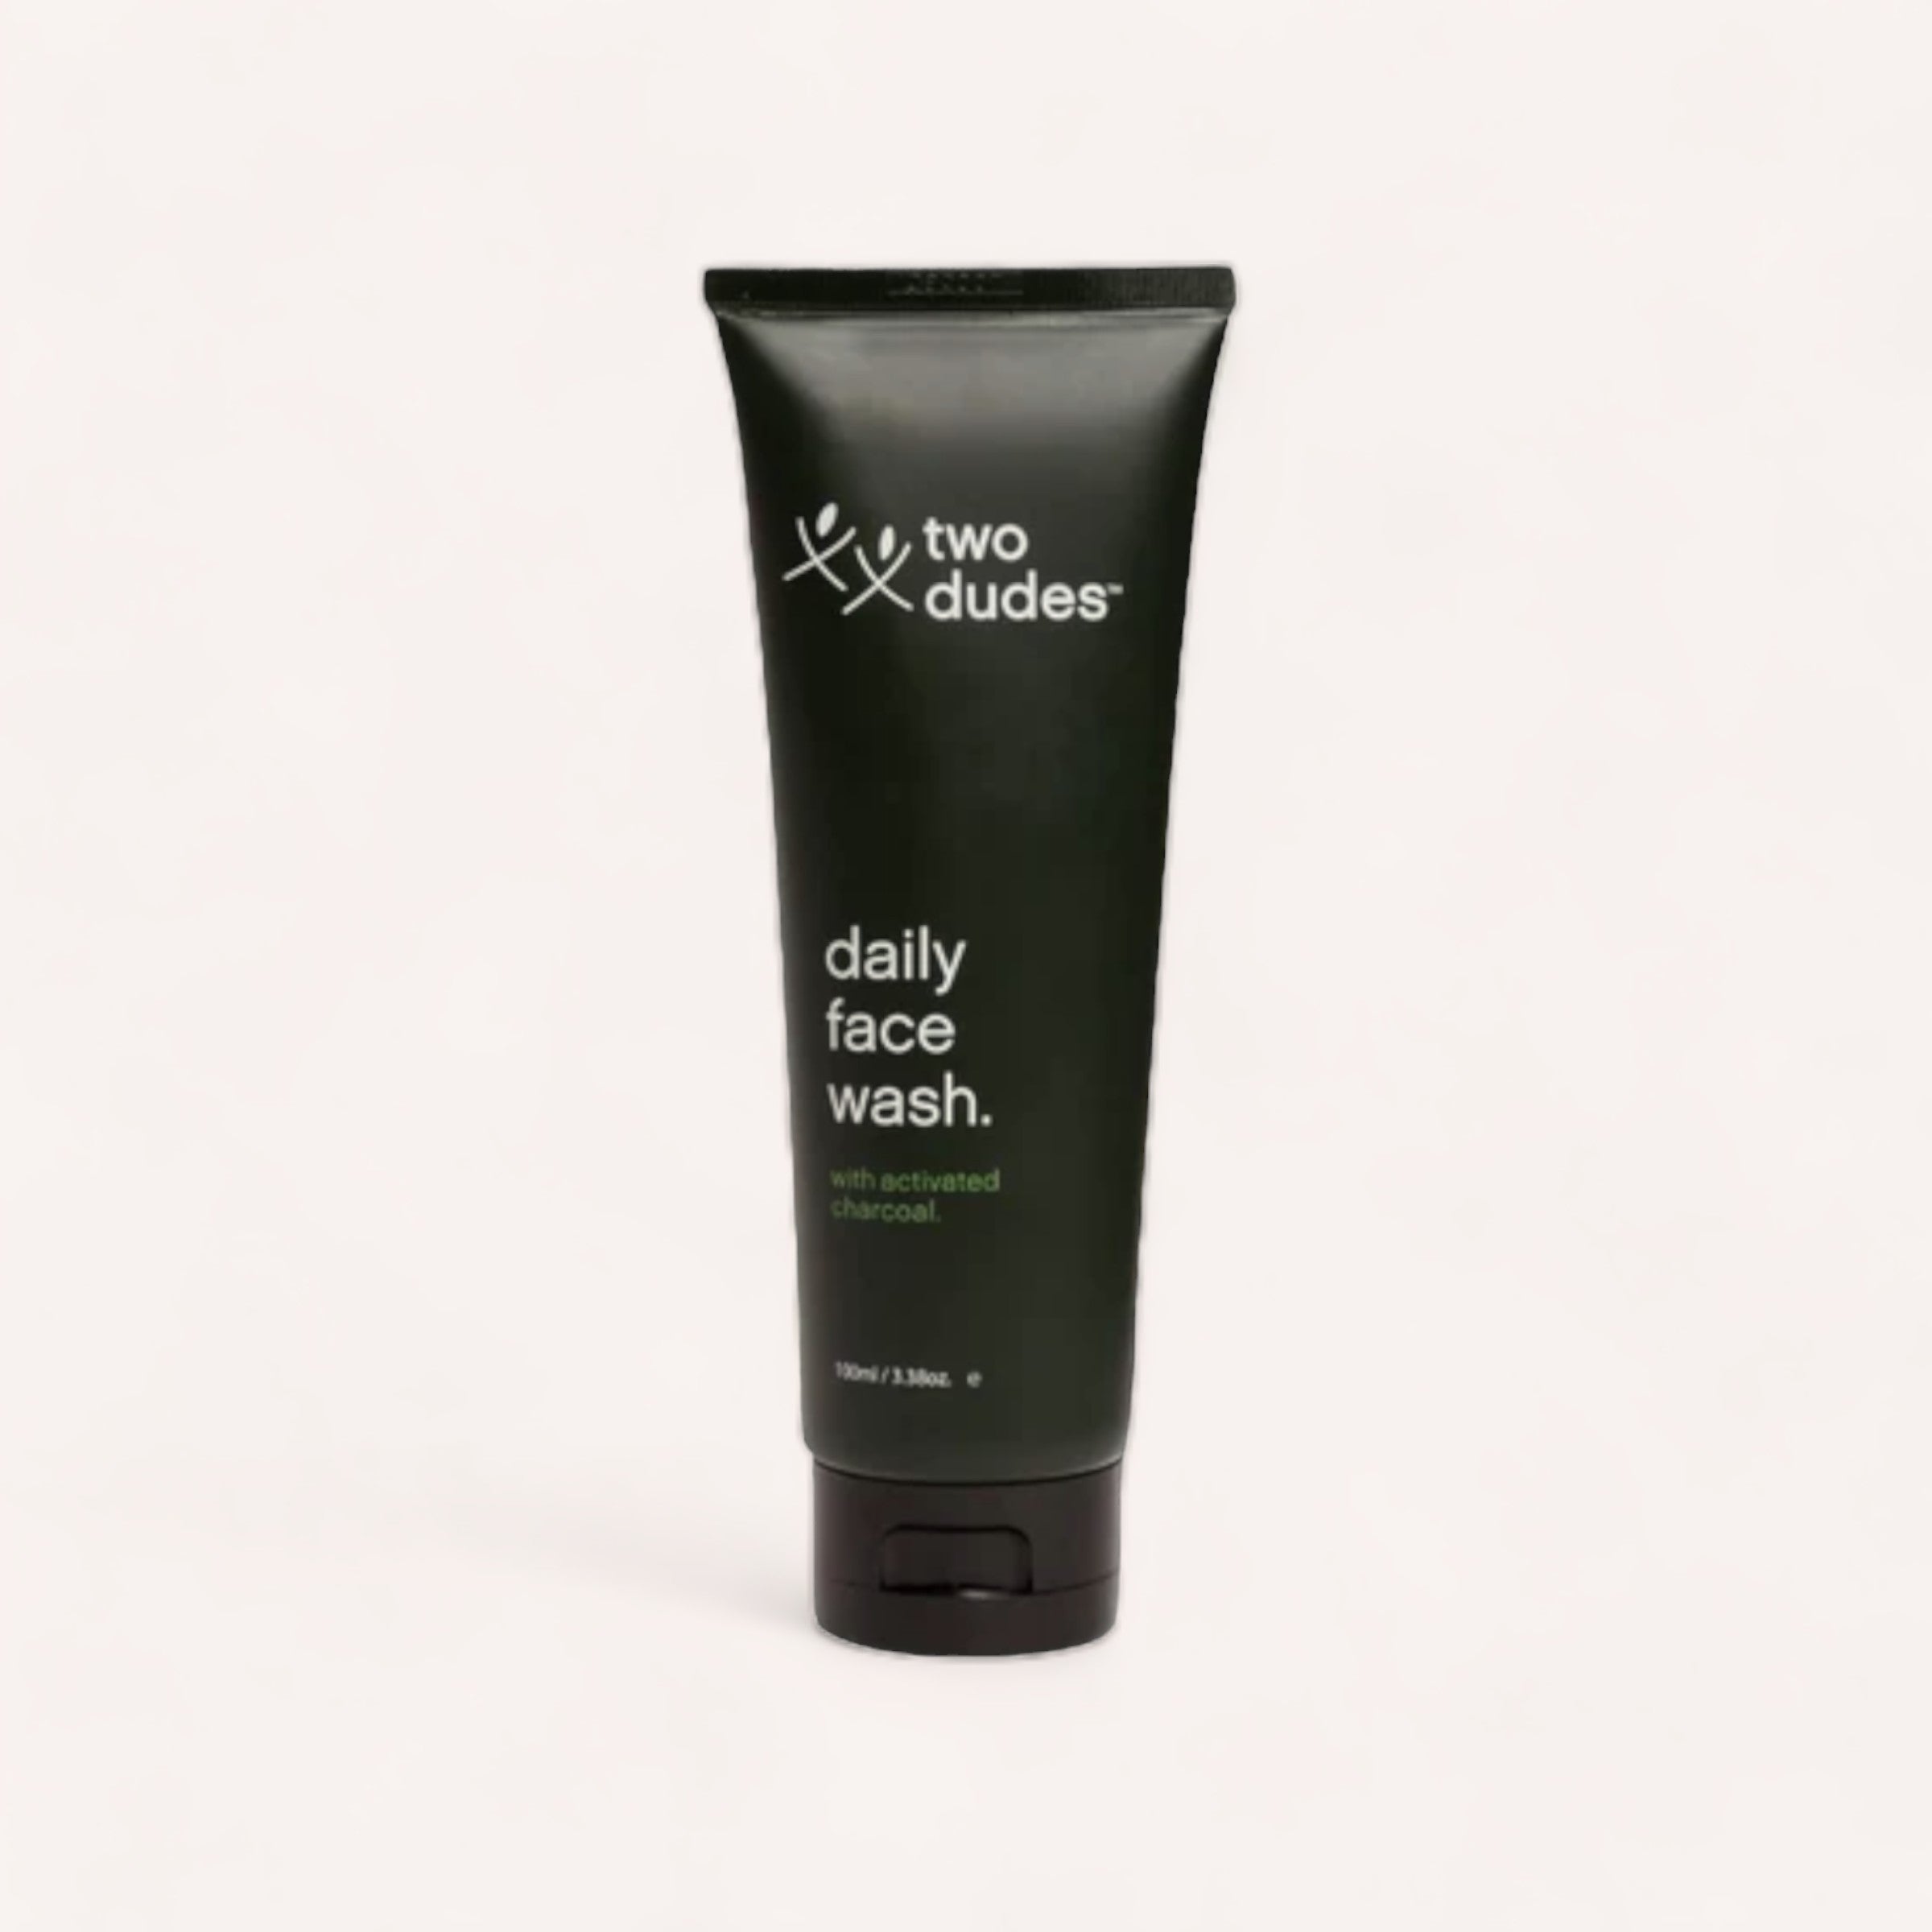 A sleek black tube of "Daily Face Wash by Two Dudes, suitable for all skin types" against a clean, light background.